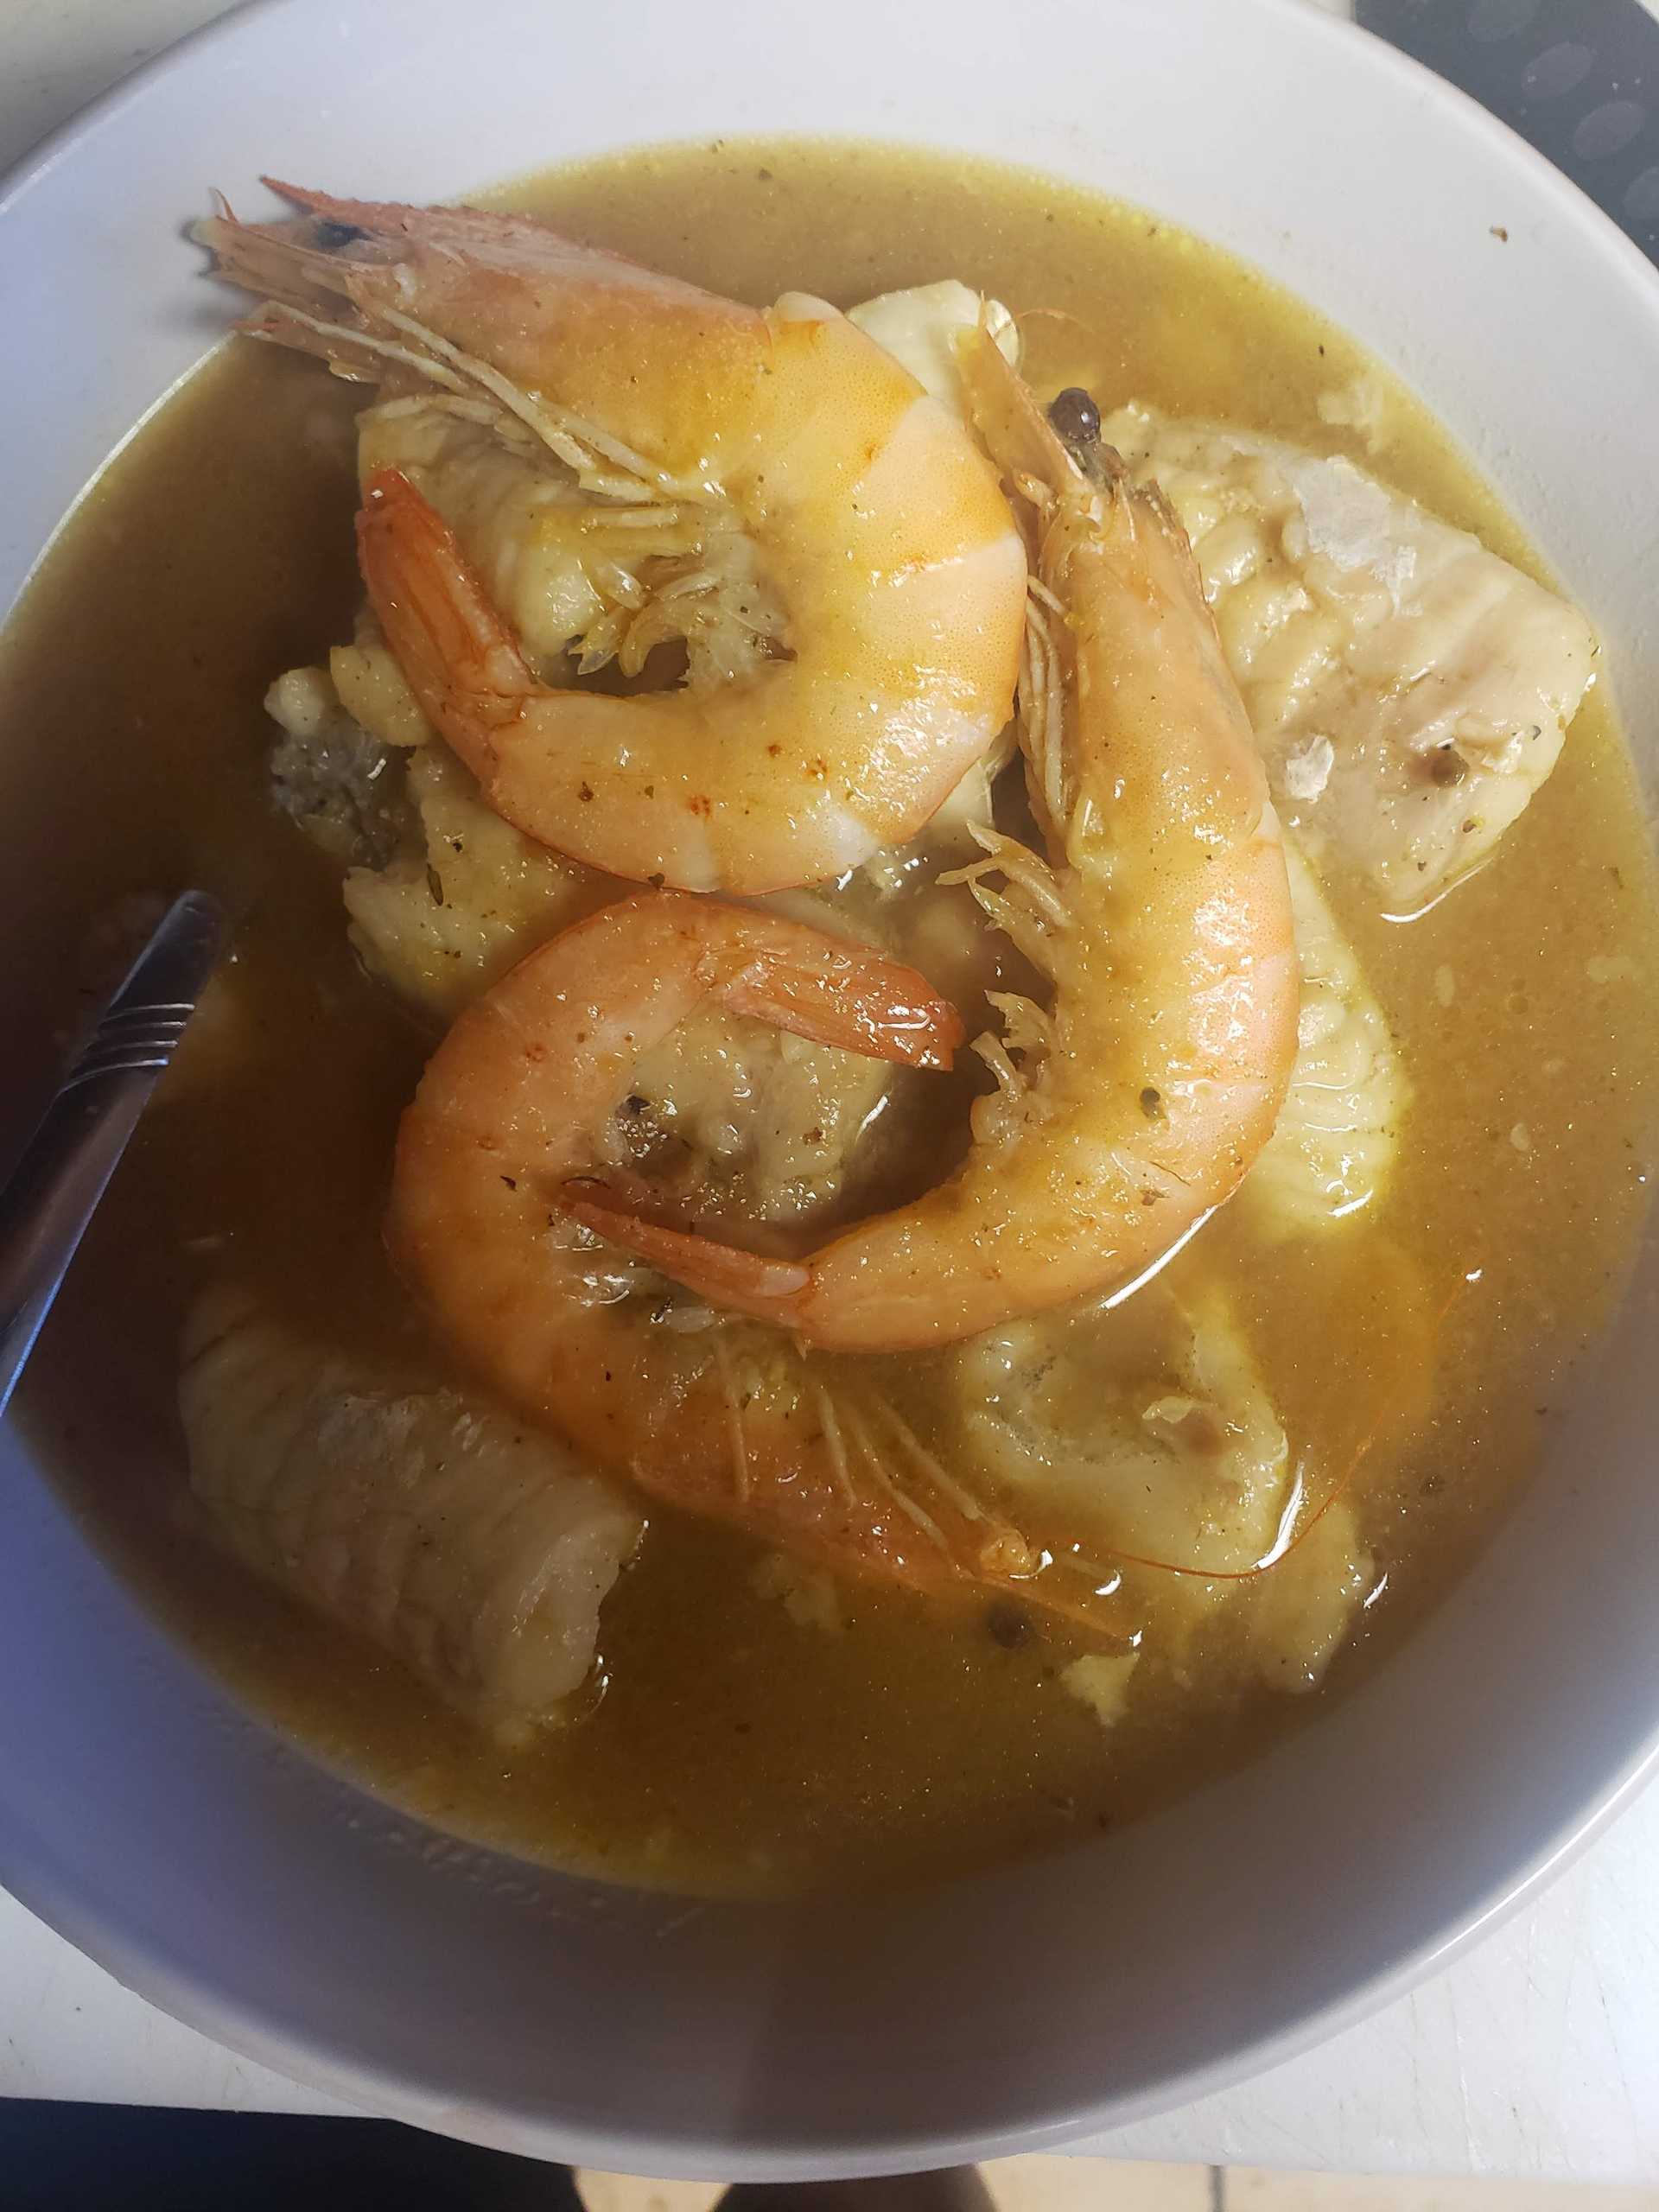 Bowl of seafood gumbo with shrimp and fish, rich in color.